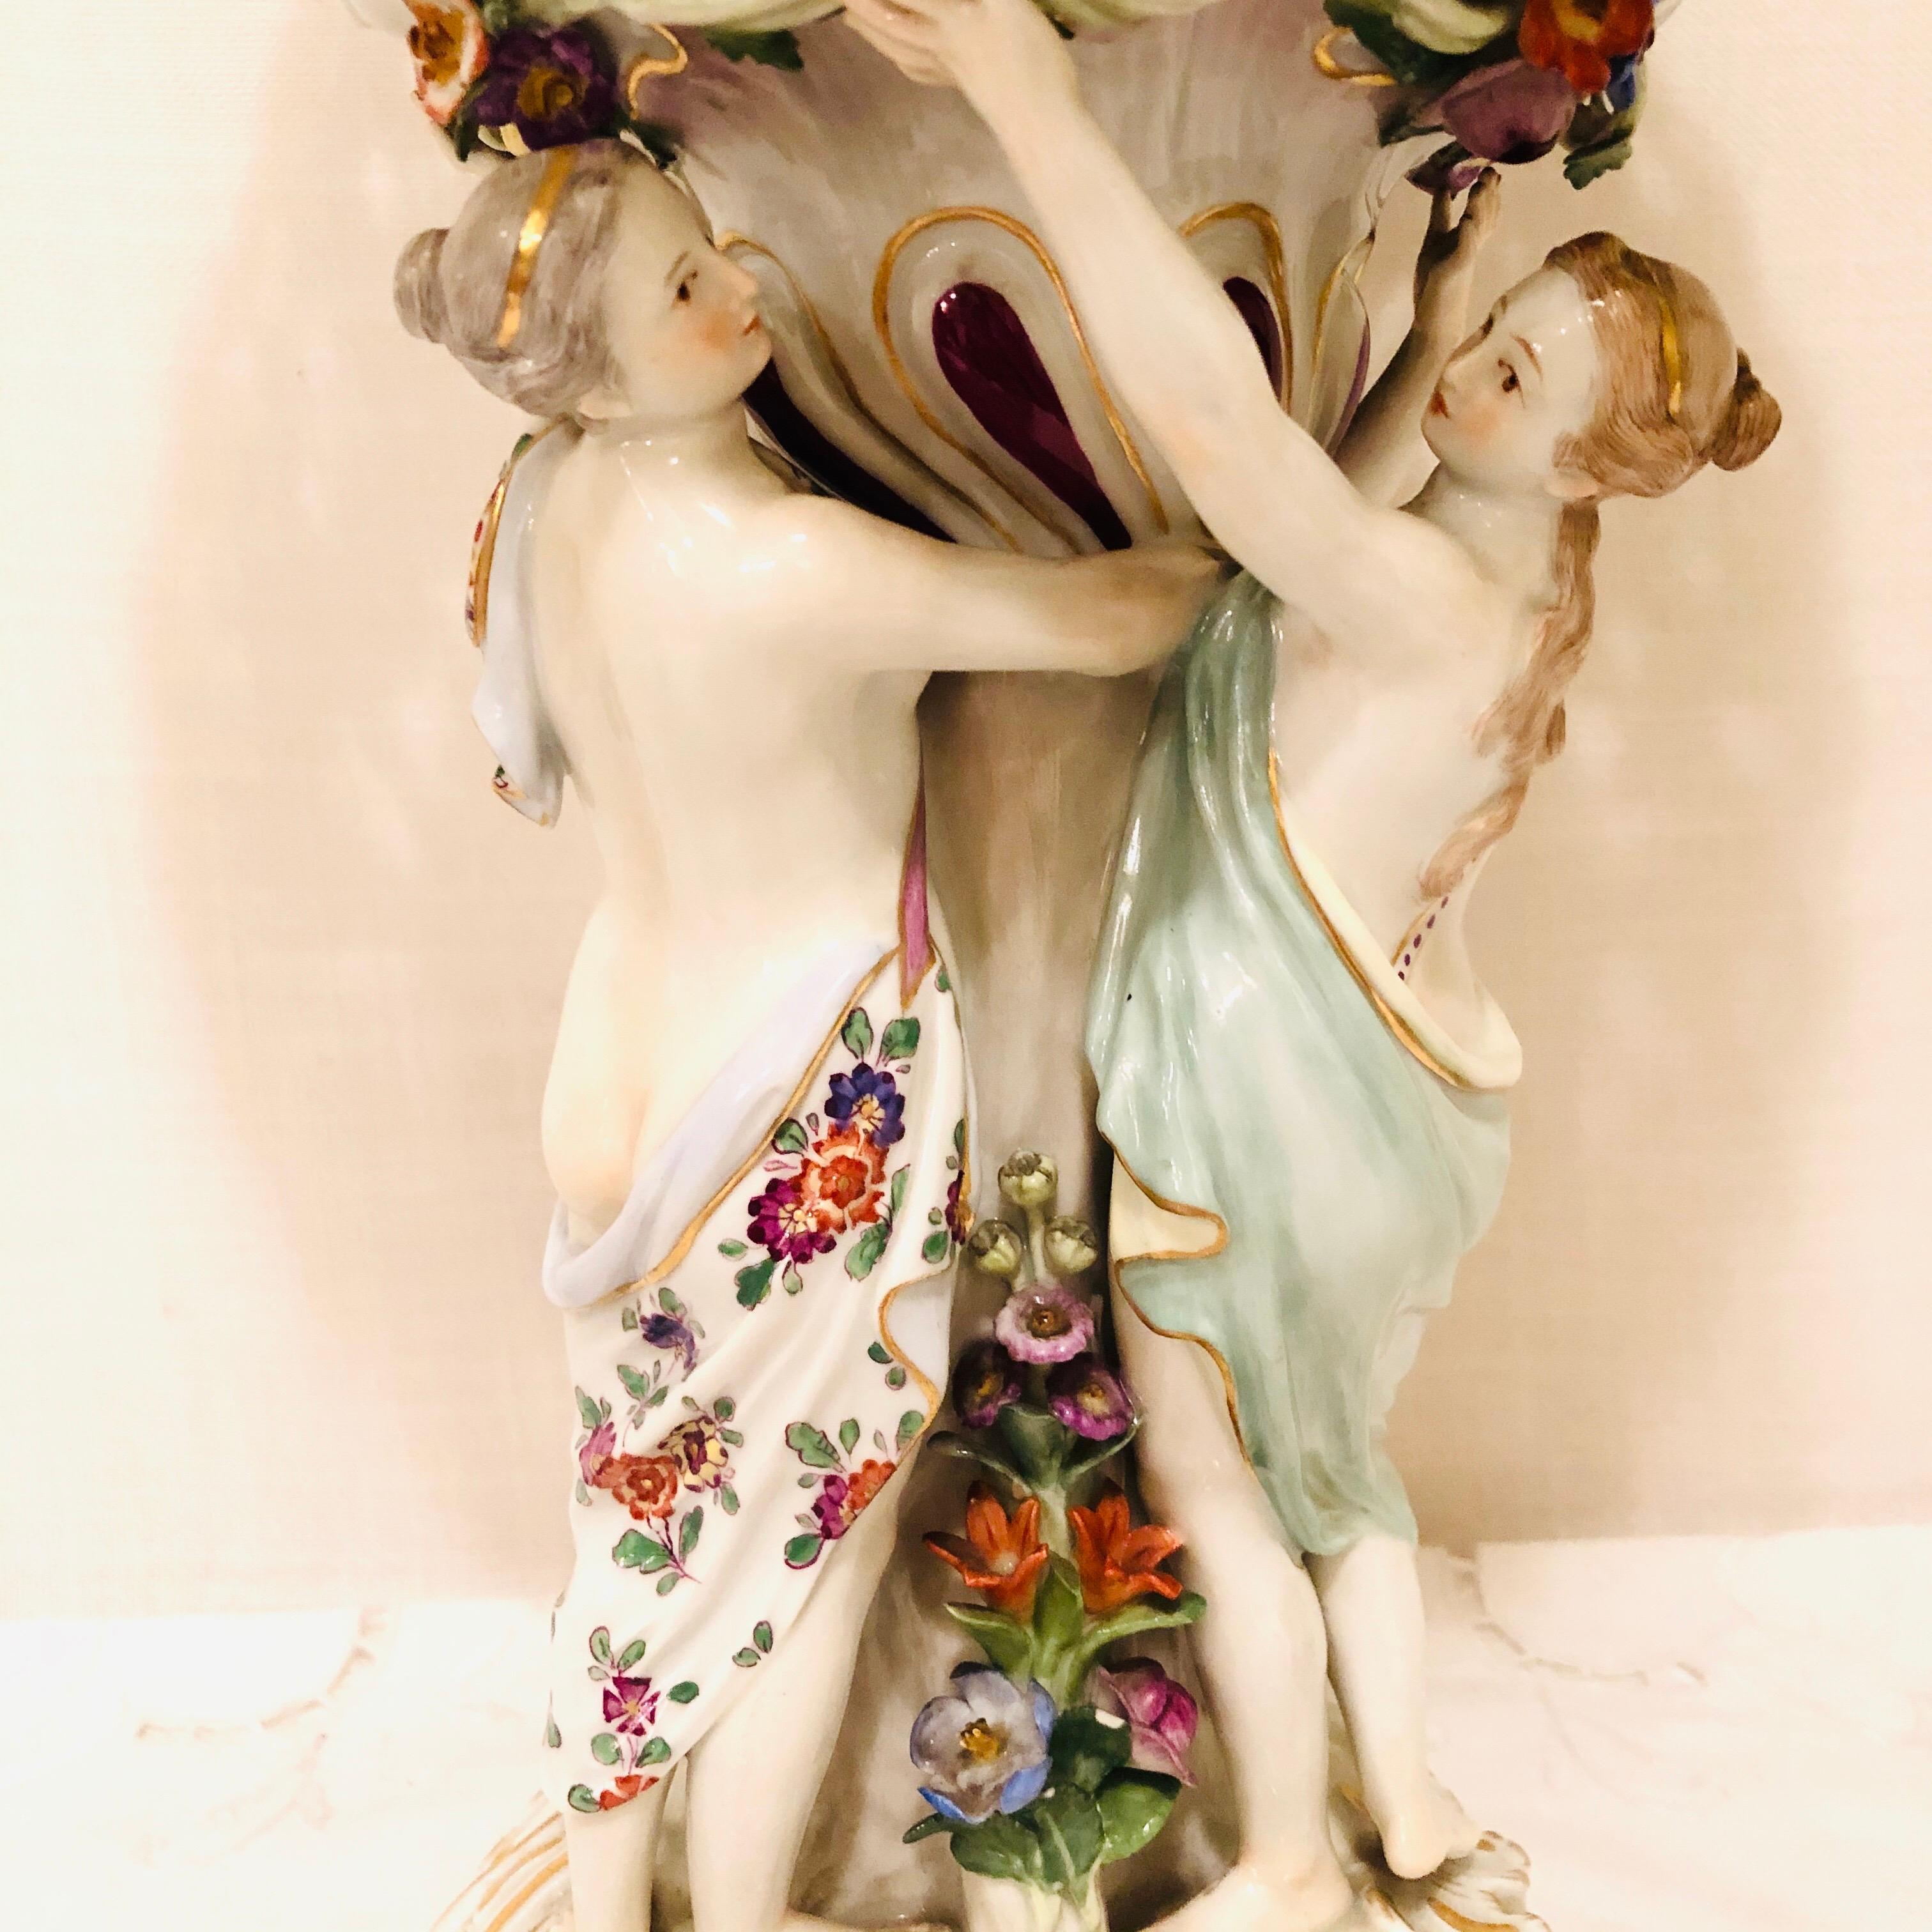 German Meissen Centerpiece Depicting the Three Charities or Graces Dancing in a Circle